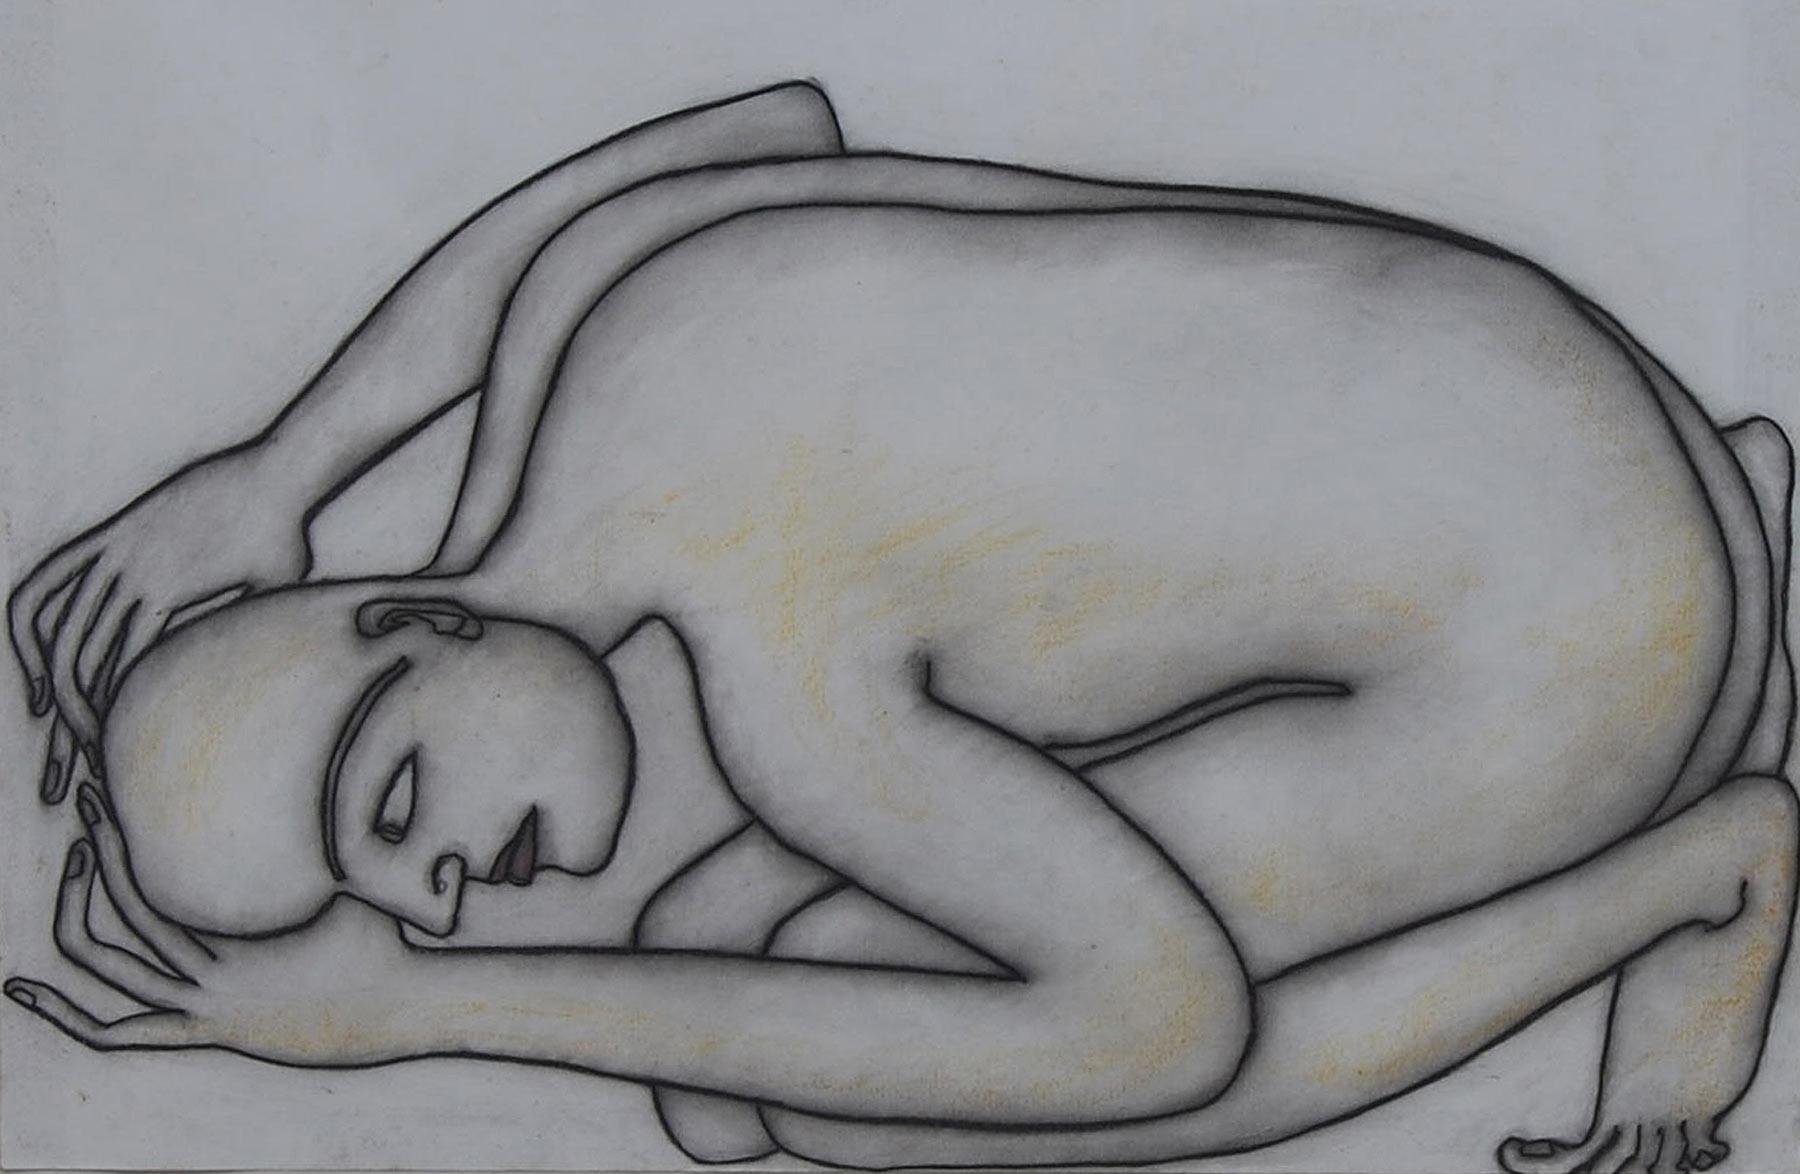 Jogen Chowdhury -  Man Kneeling on the floor - 20 x 28 inches (unframed size)
Dry Pastel on paper
Inclusive of shipment in roll form.

Kneeling Man takes a fresh look at tradition and Modernism , drawing freely upon ideas and values from native